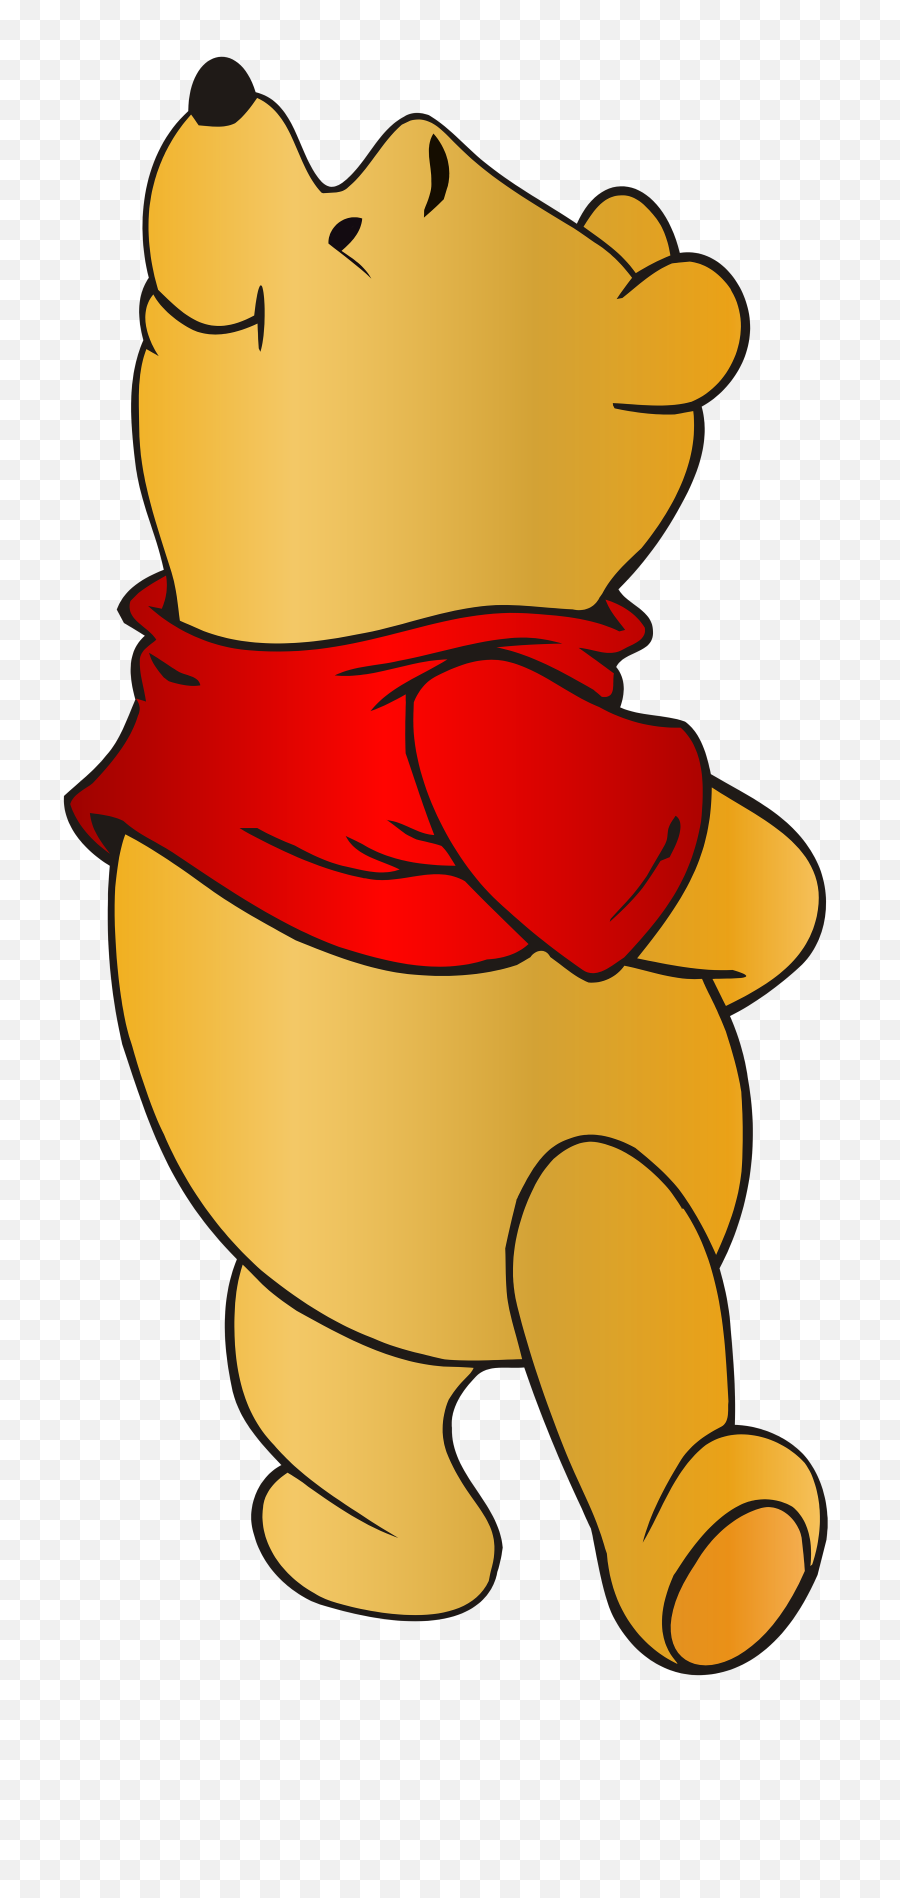 Winnie The Pooh Png Transparent - Winnie The Pooh Transparent Png Mart,Winnie The Pooh Transparent Background